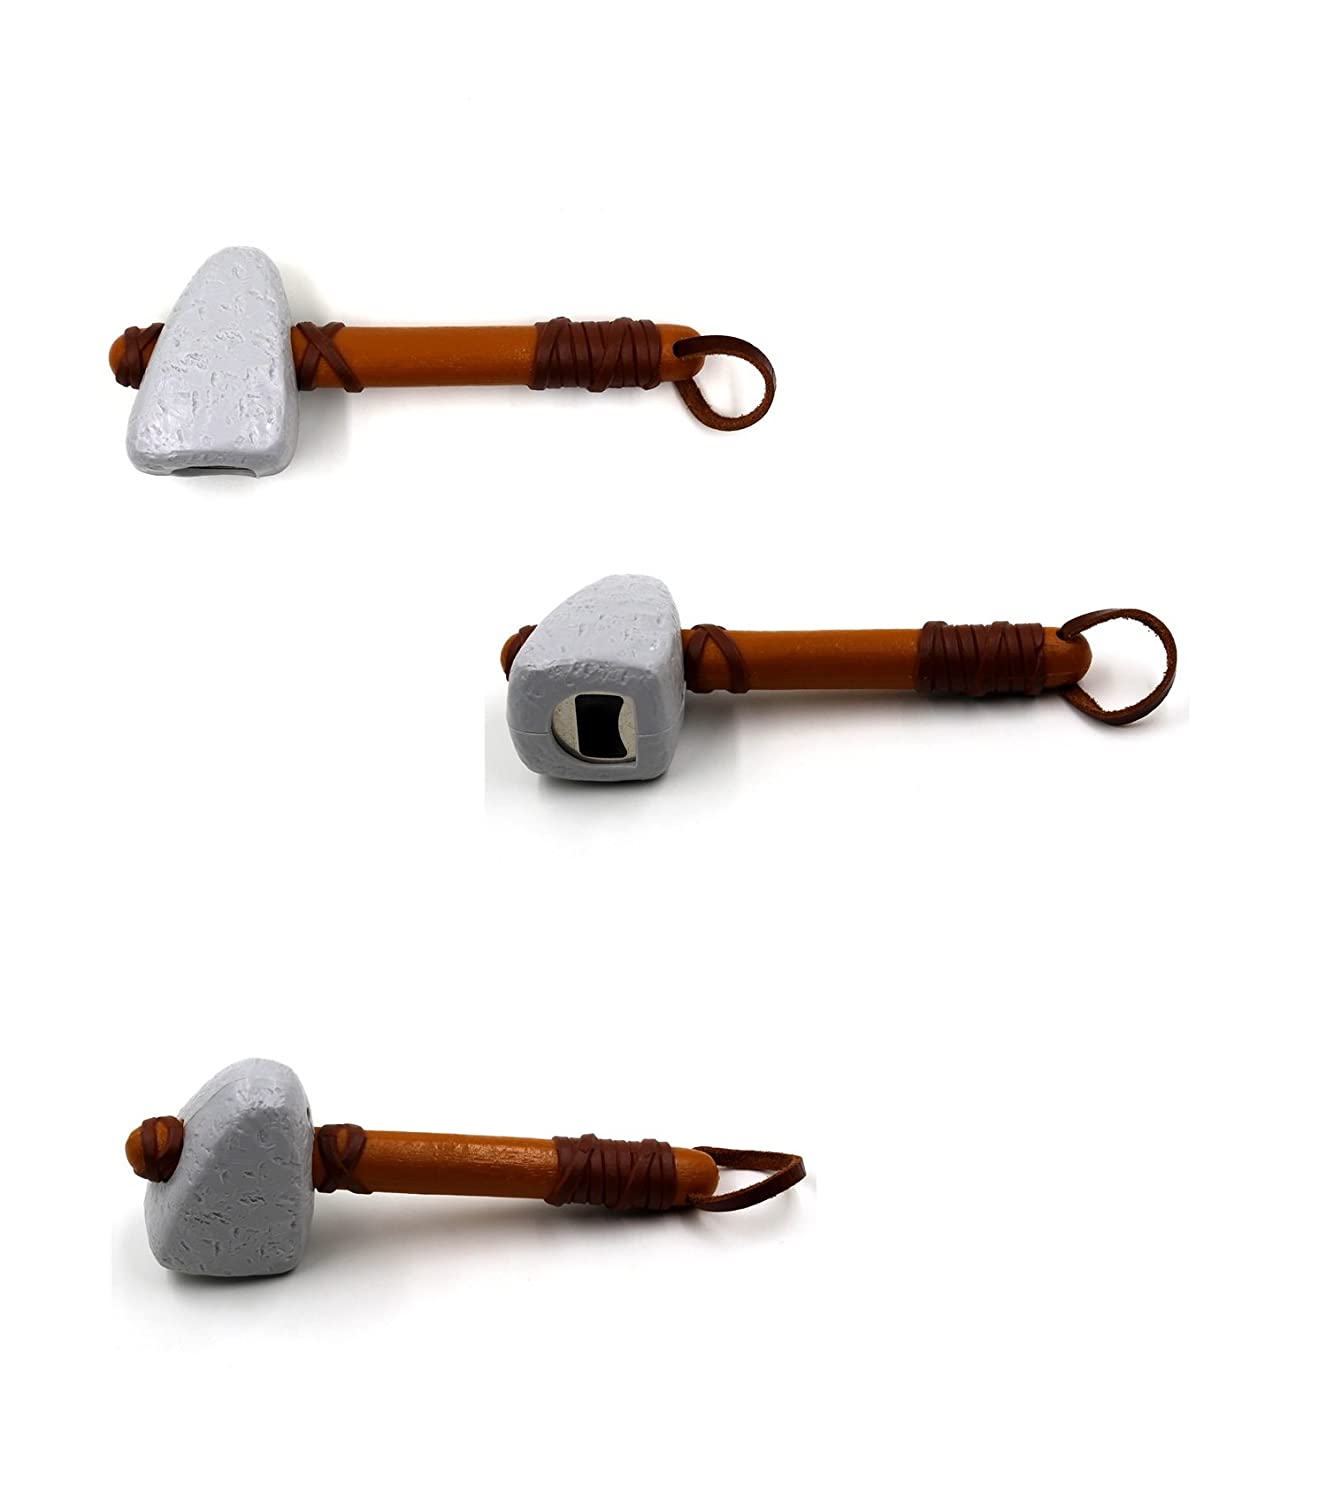 Stone Age Caveman Hammer Bottle Opener with Leather Strap freeshipping - GeekGoodies.in